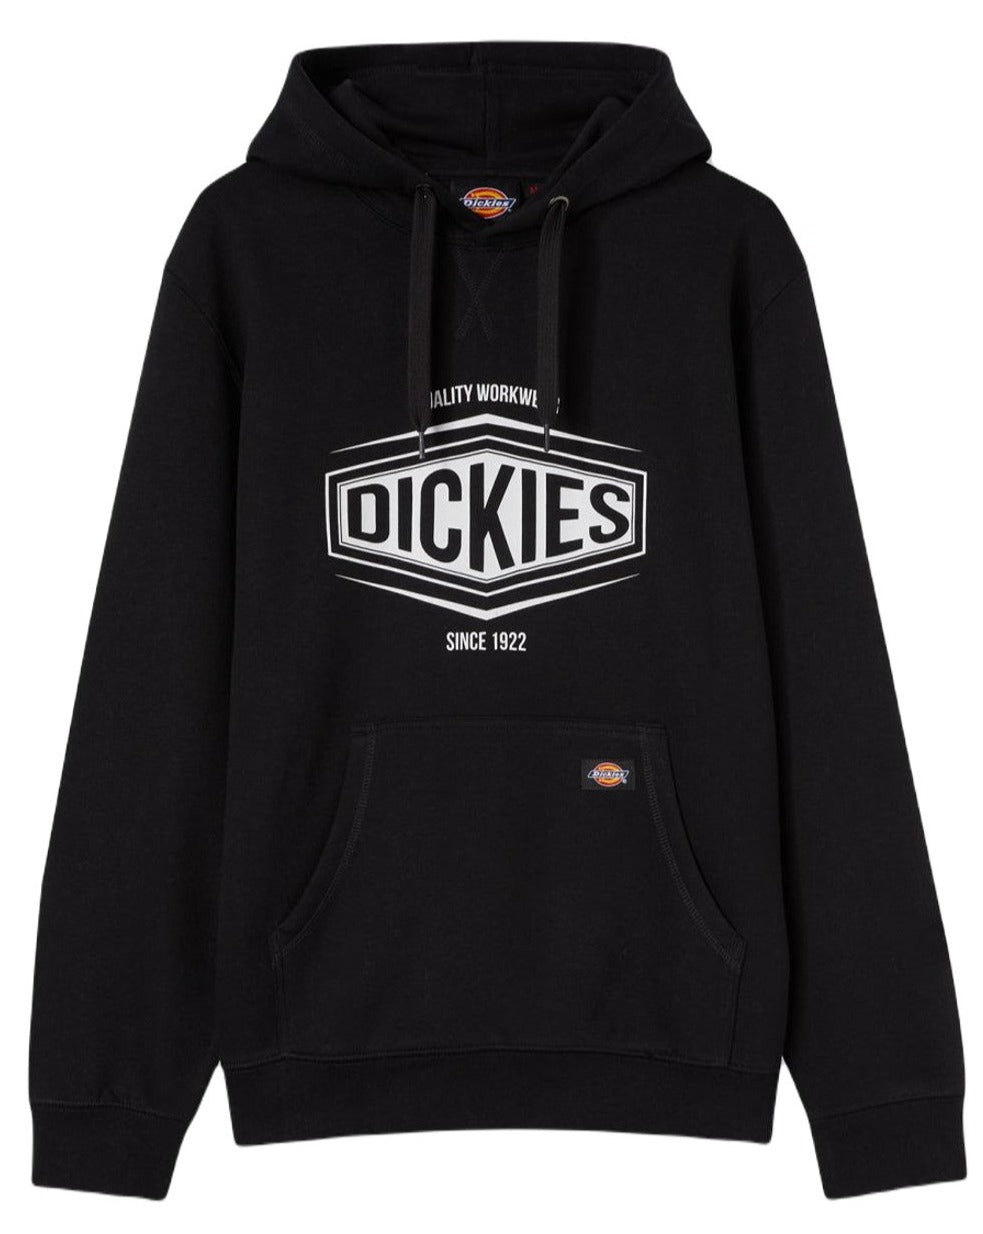 Reliable Workwear Dickies | Brand for Go-To The Clothing